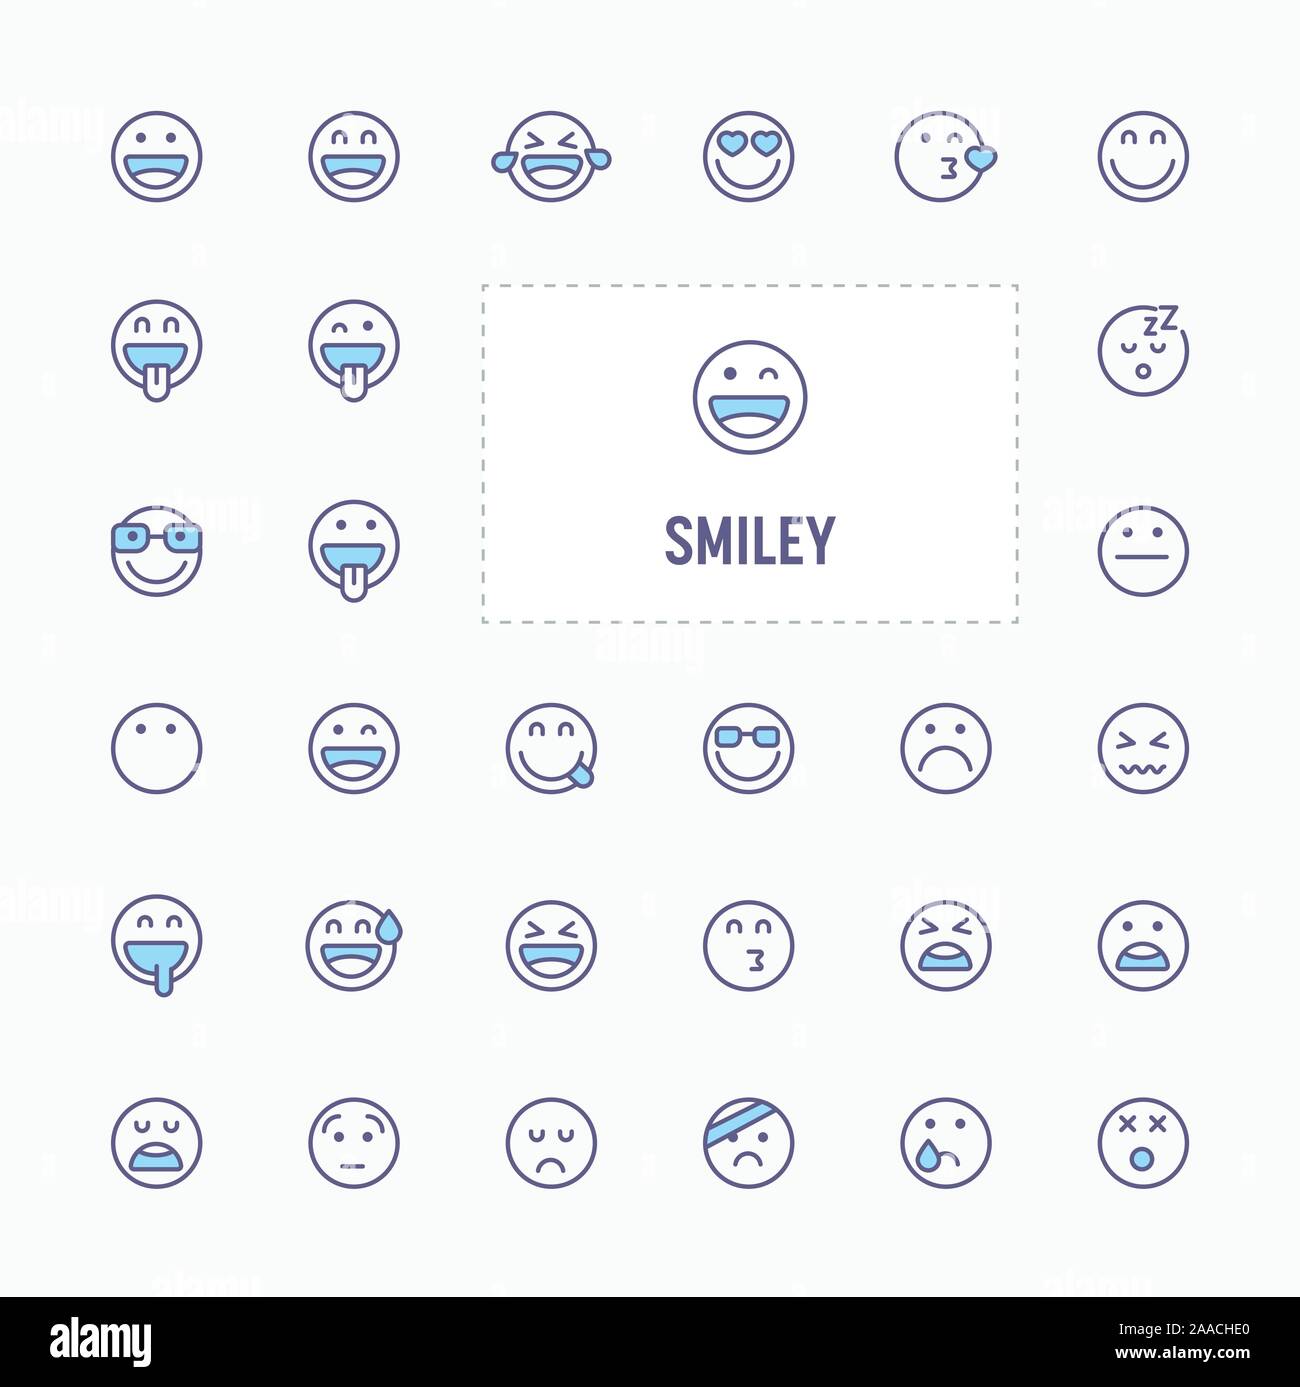 Smiley and emoticon - thin line website, application & presentation icon. simple and minimal vector icon and illustration collection. Stock Vector